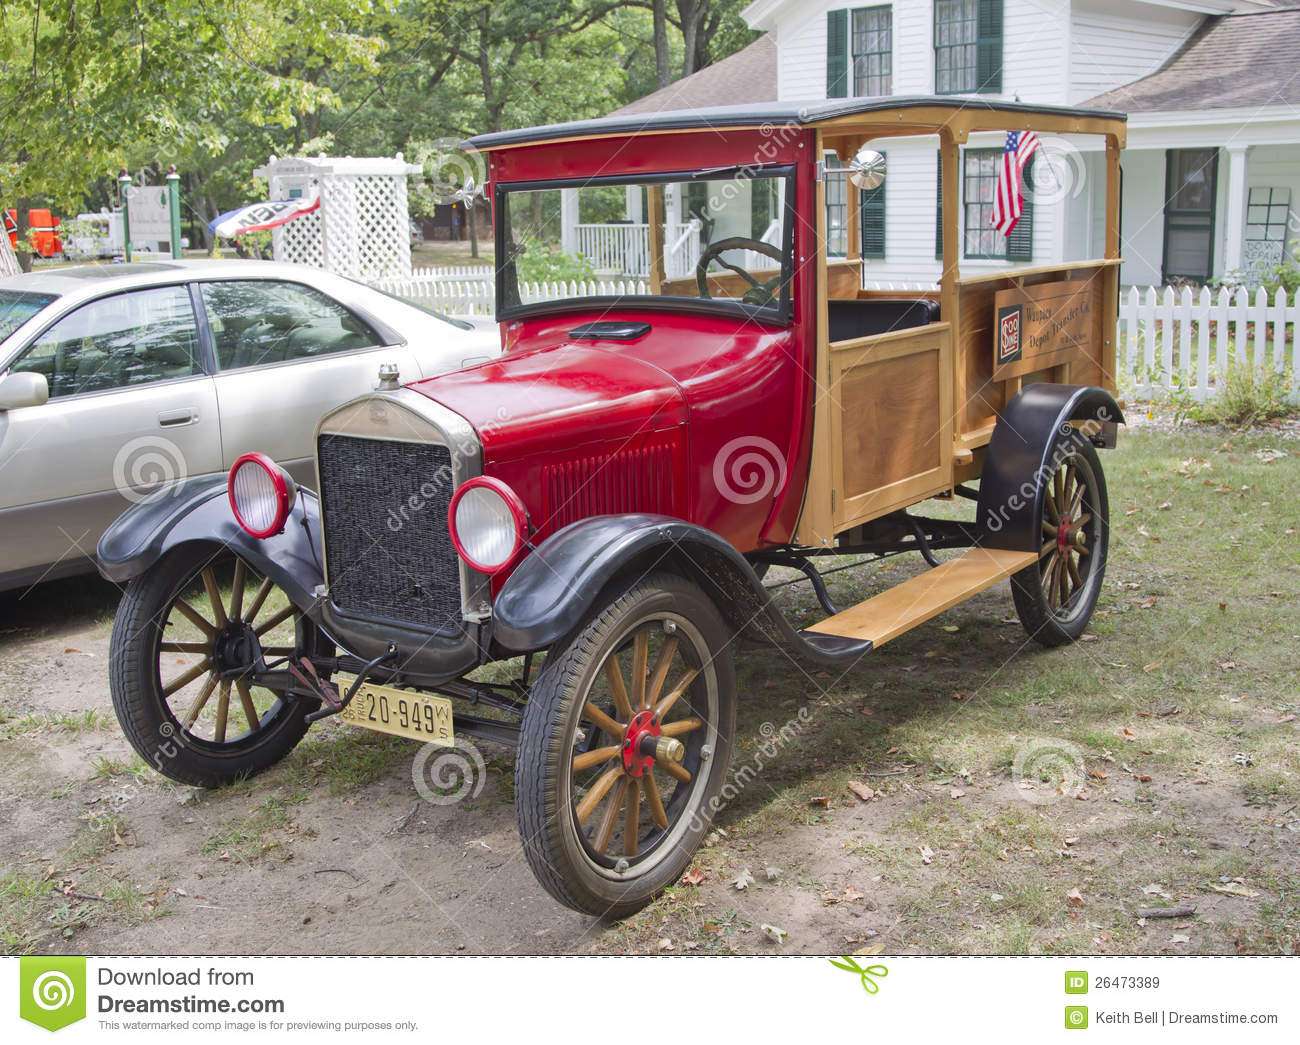 Waupaca Wi   August 25  1926 Ford Model T Red Car At The 10th Annual